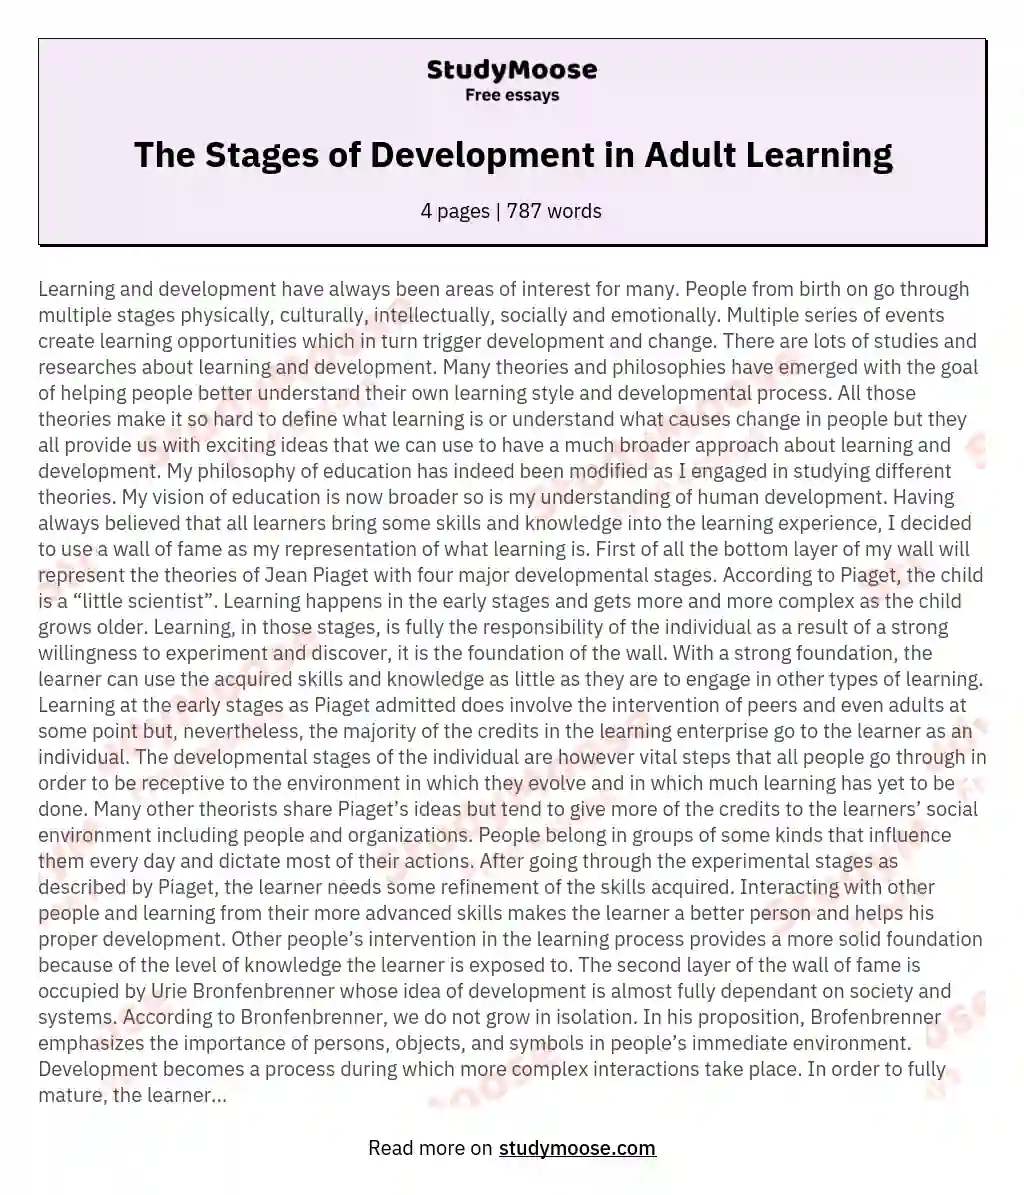 The Stages of Development in Adult Learning